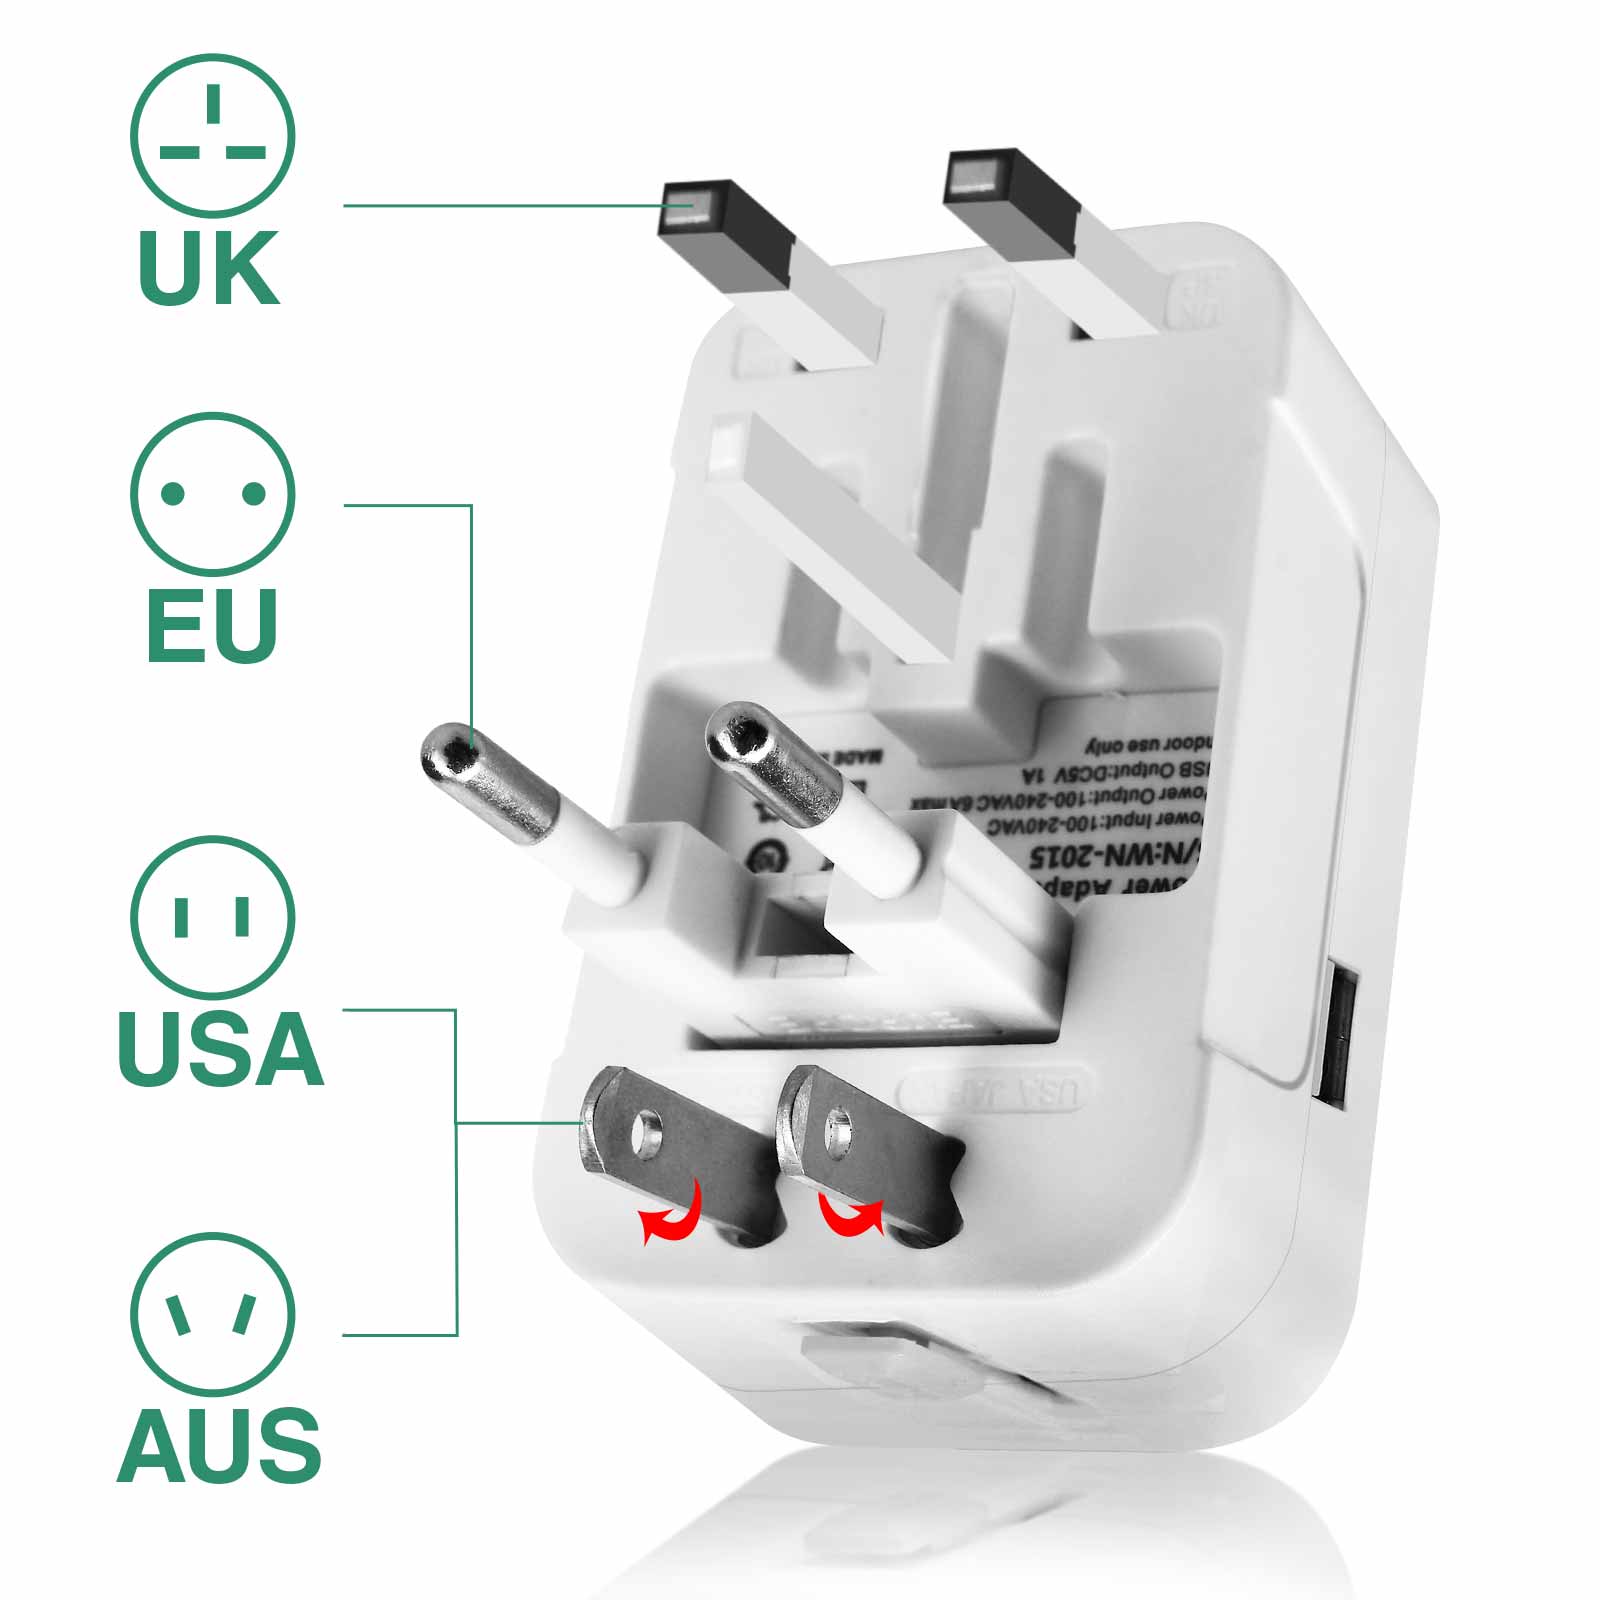 Adaptateur Voyage Universel, Adaptateur Prise Universelle Multi-fonction,  Internationale 200 Pays (france, Usa, Uk Et Australie), All-in-one Travel  Ad